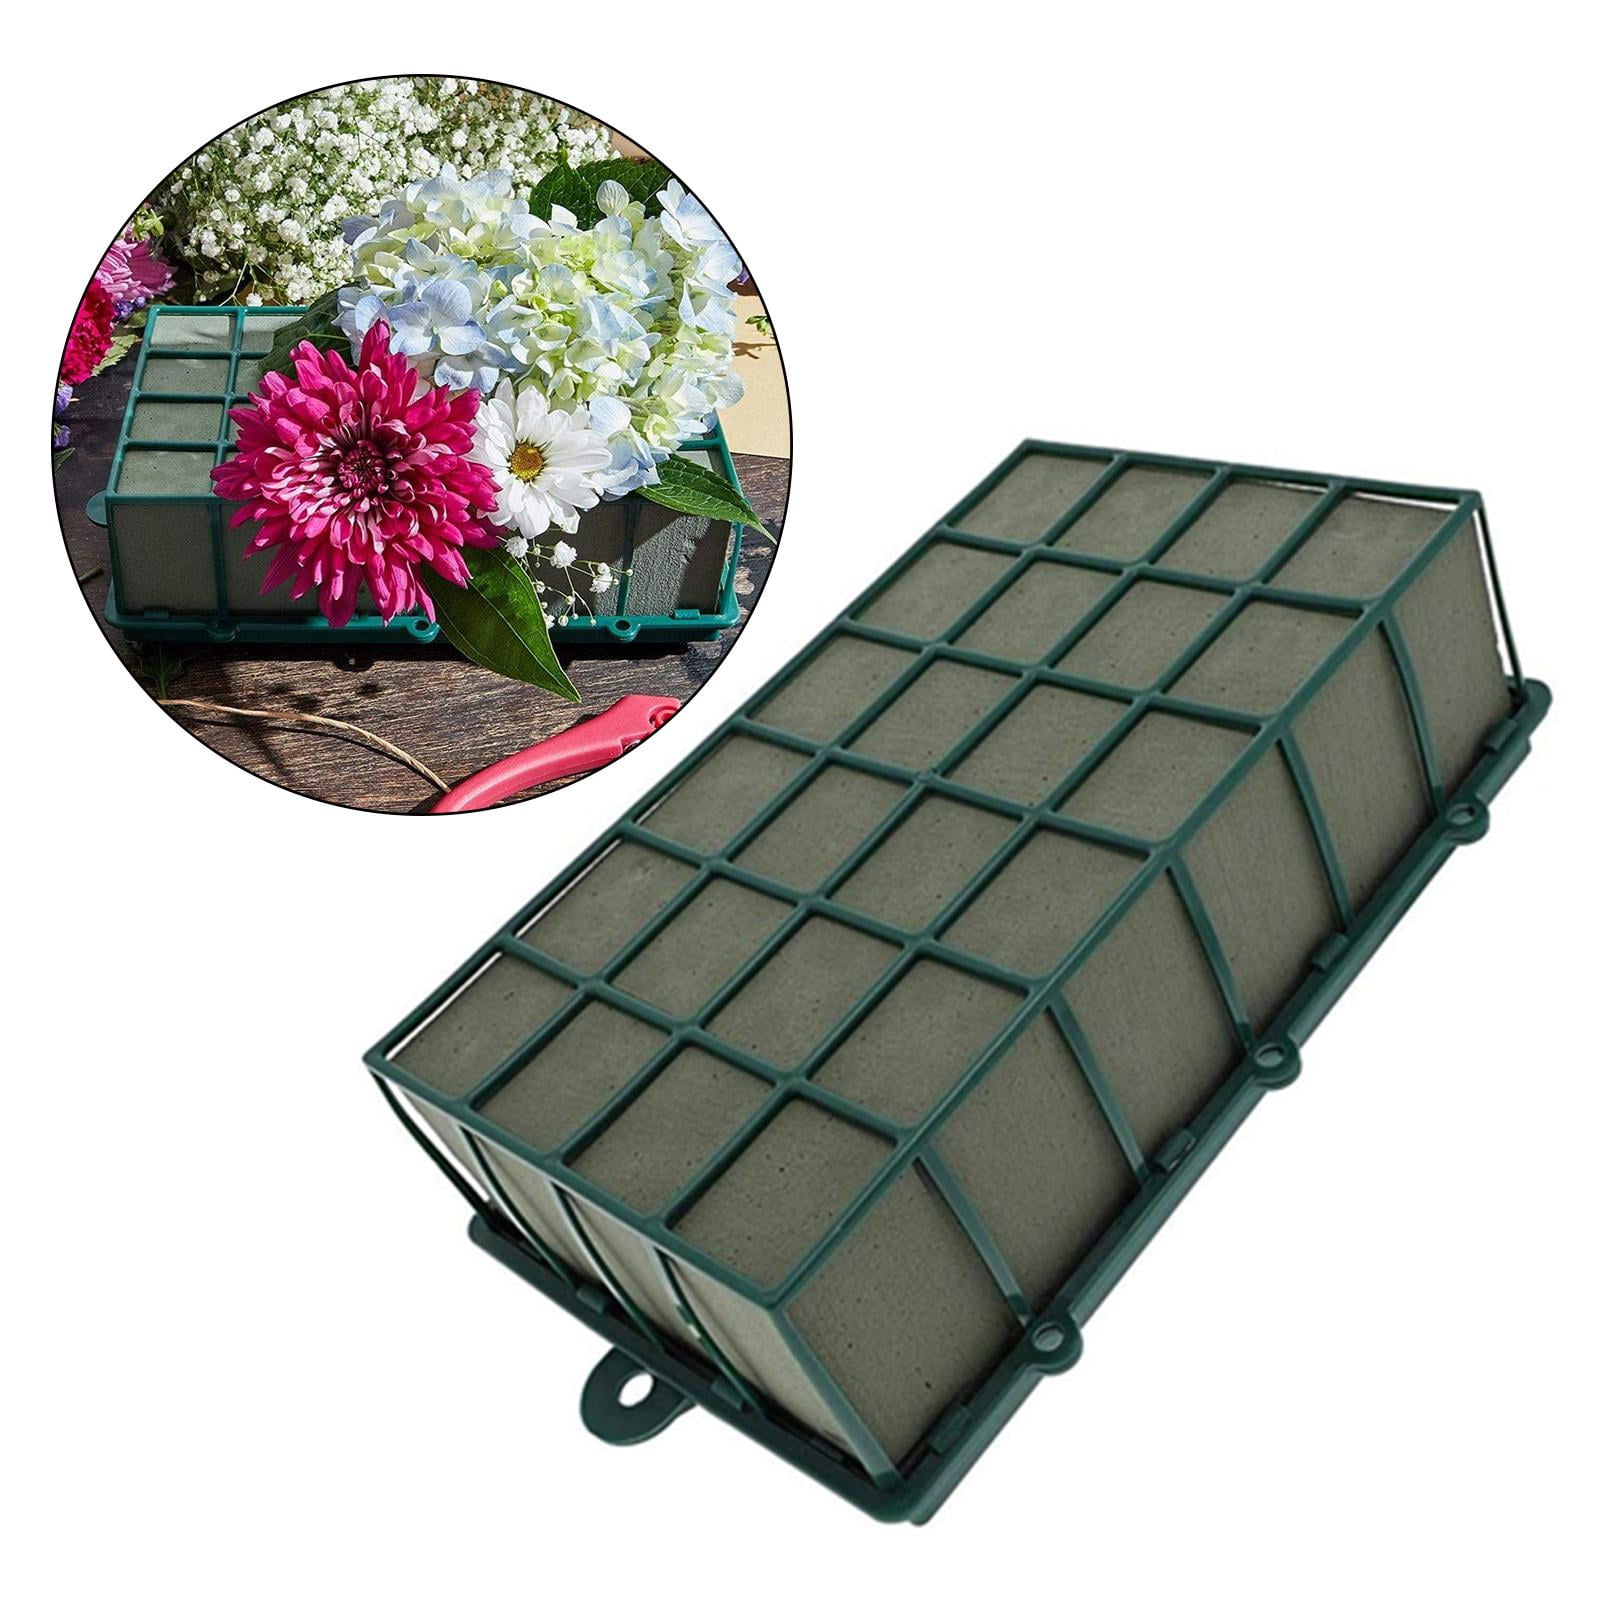 4 Pack Genie Floral Foam Cage with Handles for Flower Arrangements (7 x 4.5  x 3 in)